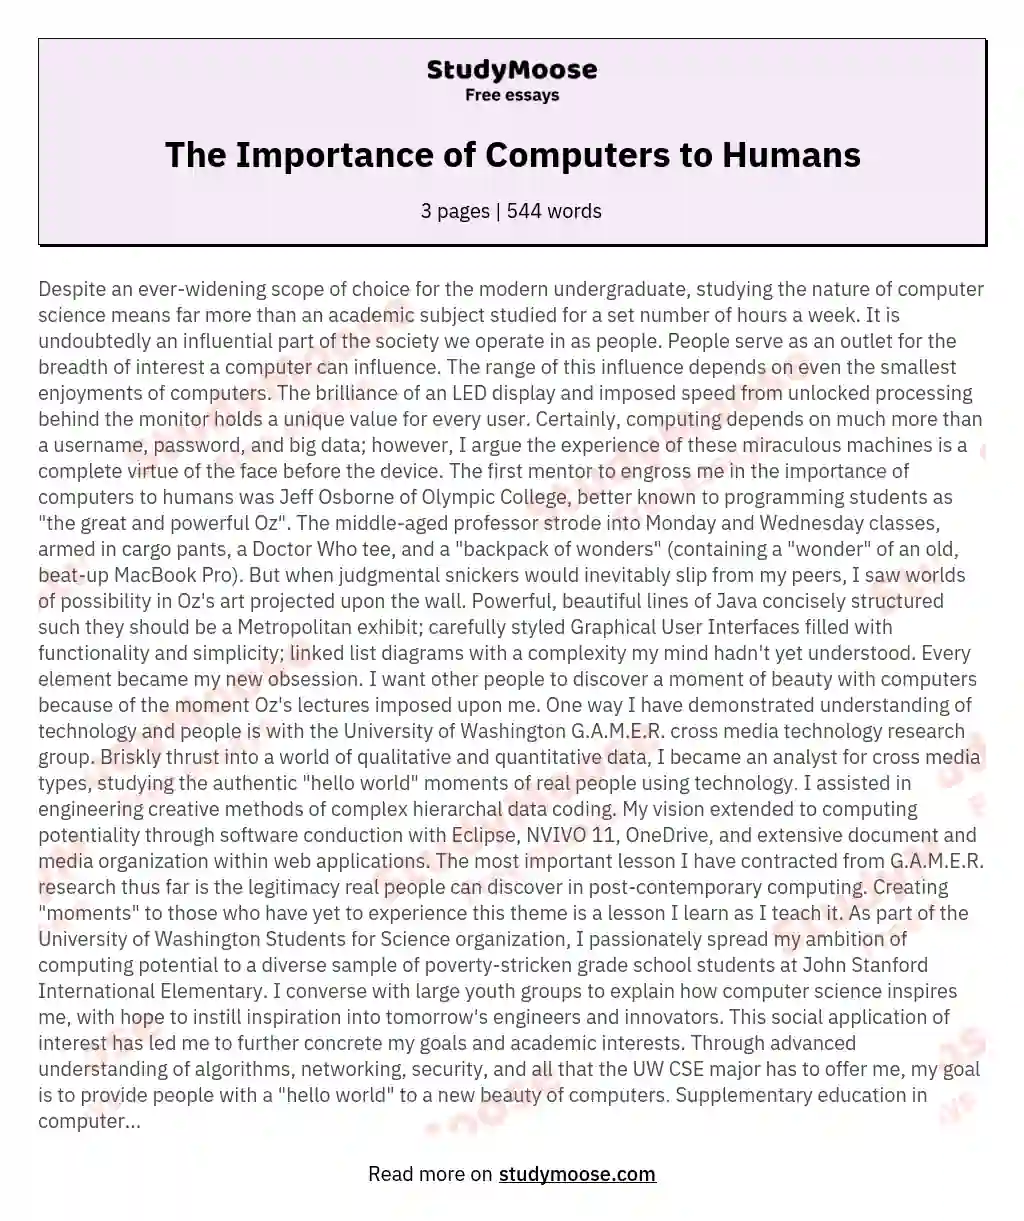 The Importance of Computers to Humans essay